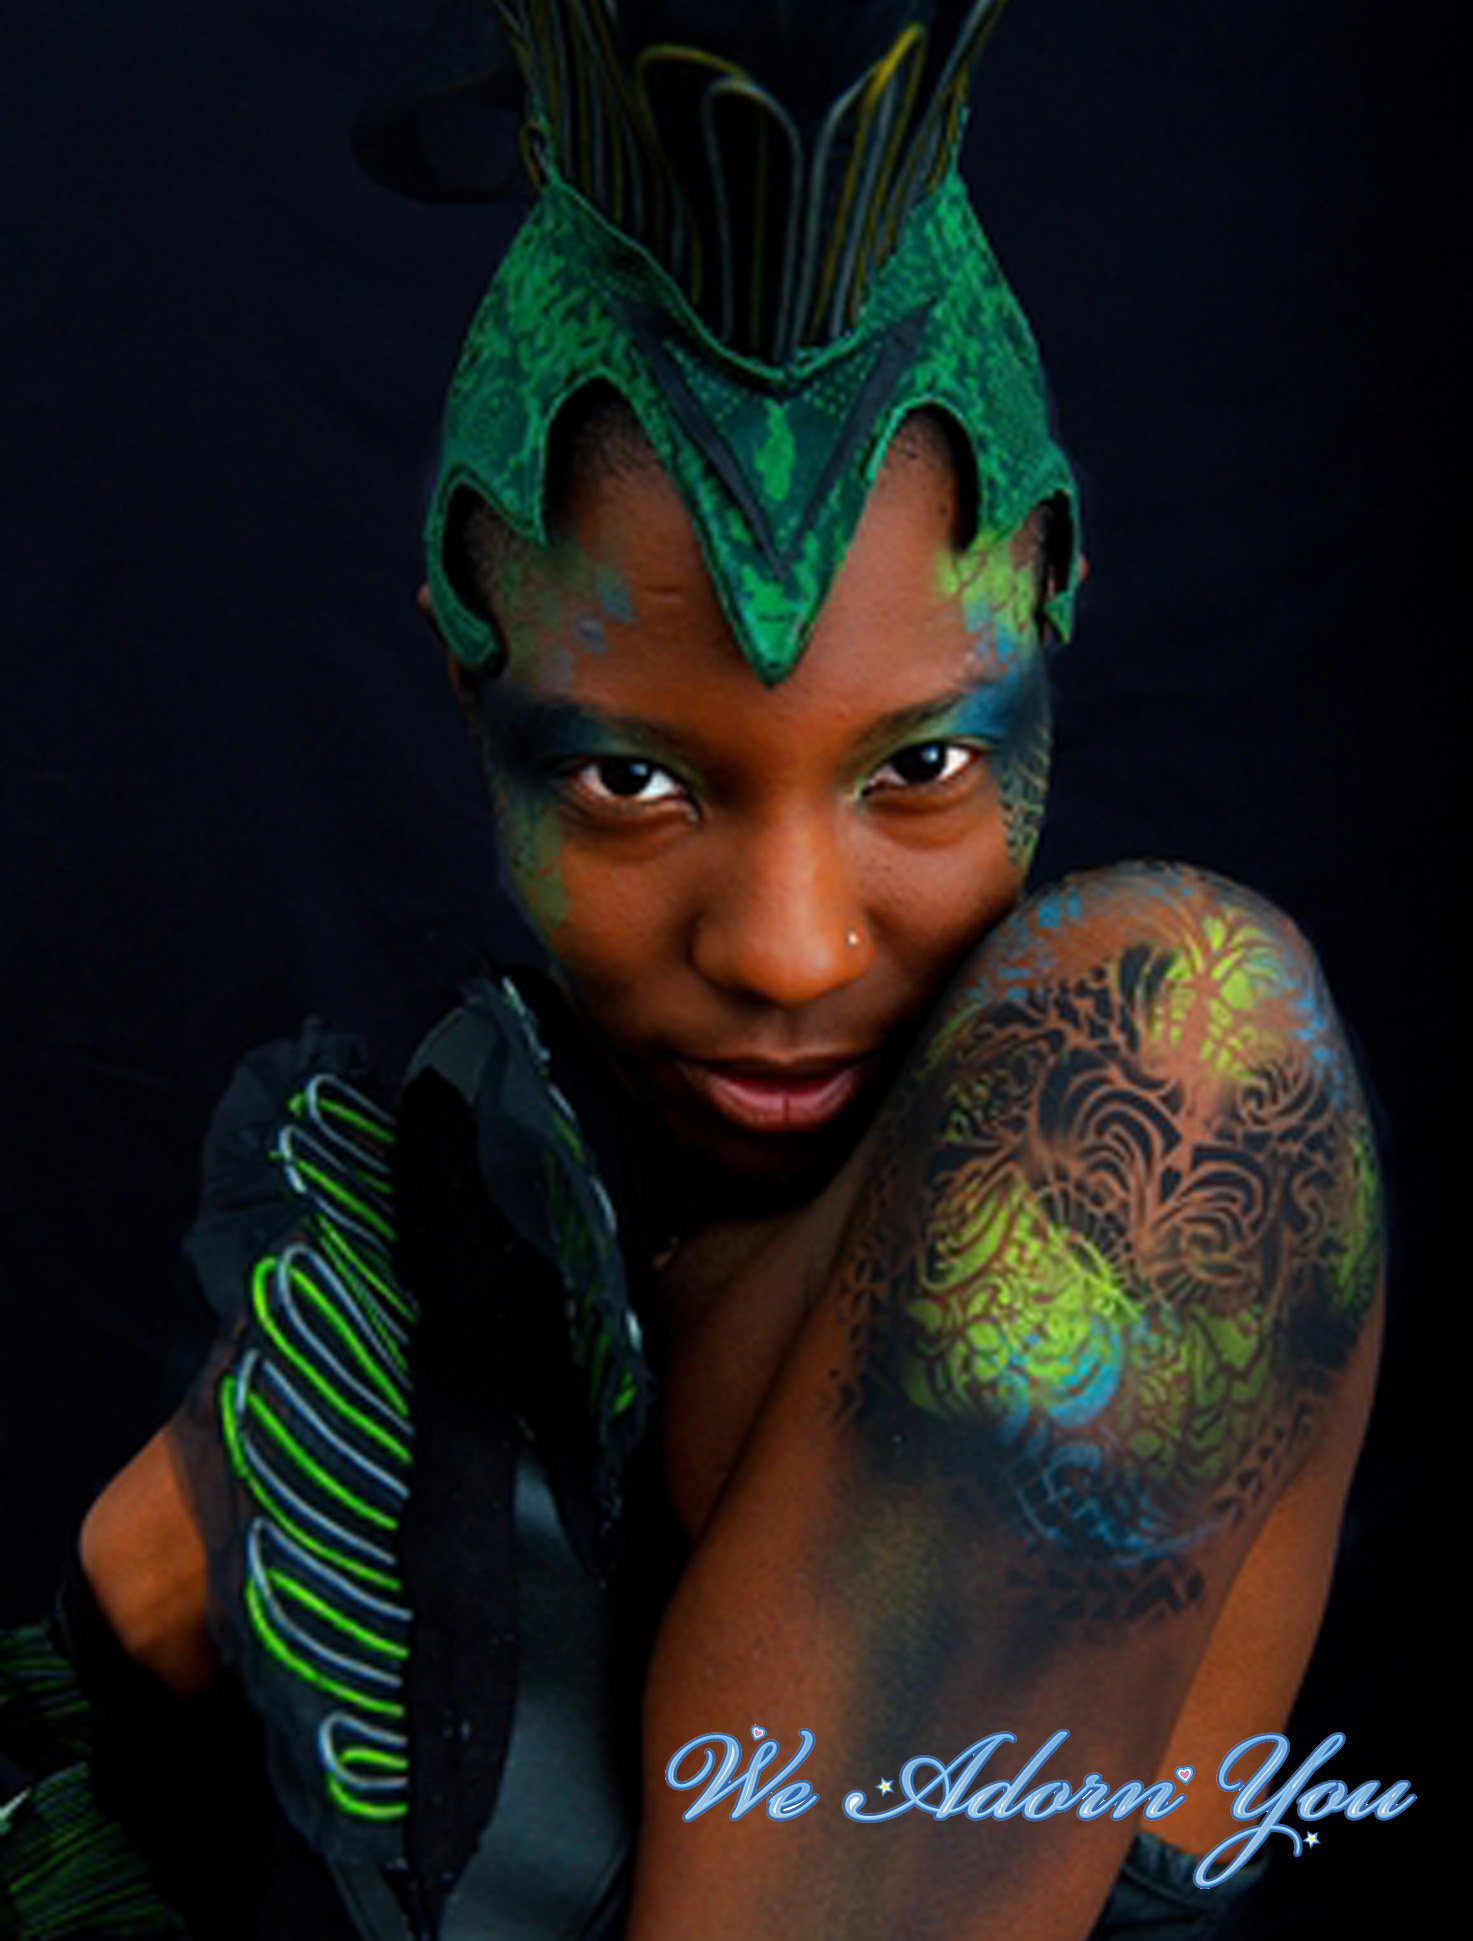 Body Painting Warrior - We Adorn You.jpg